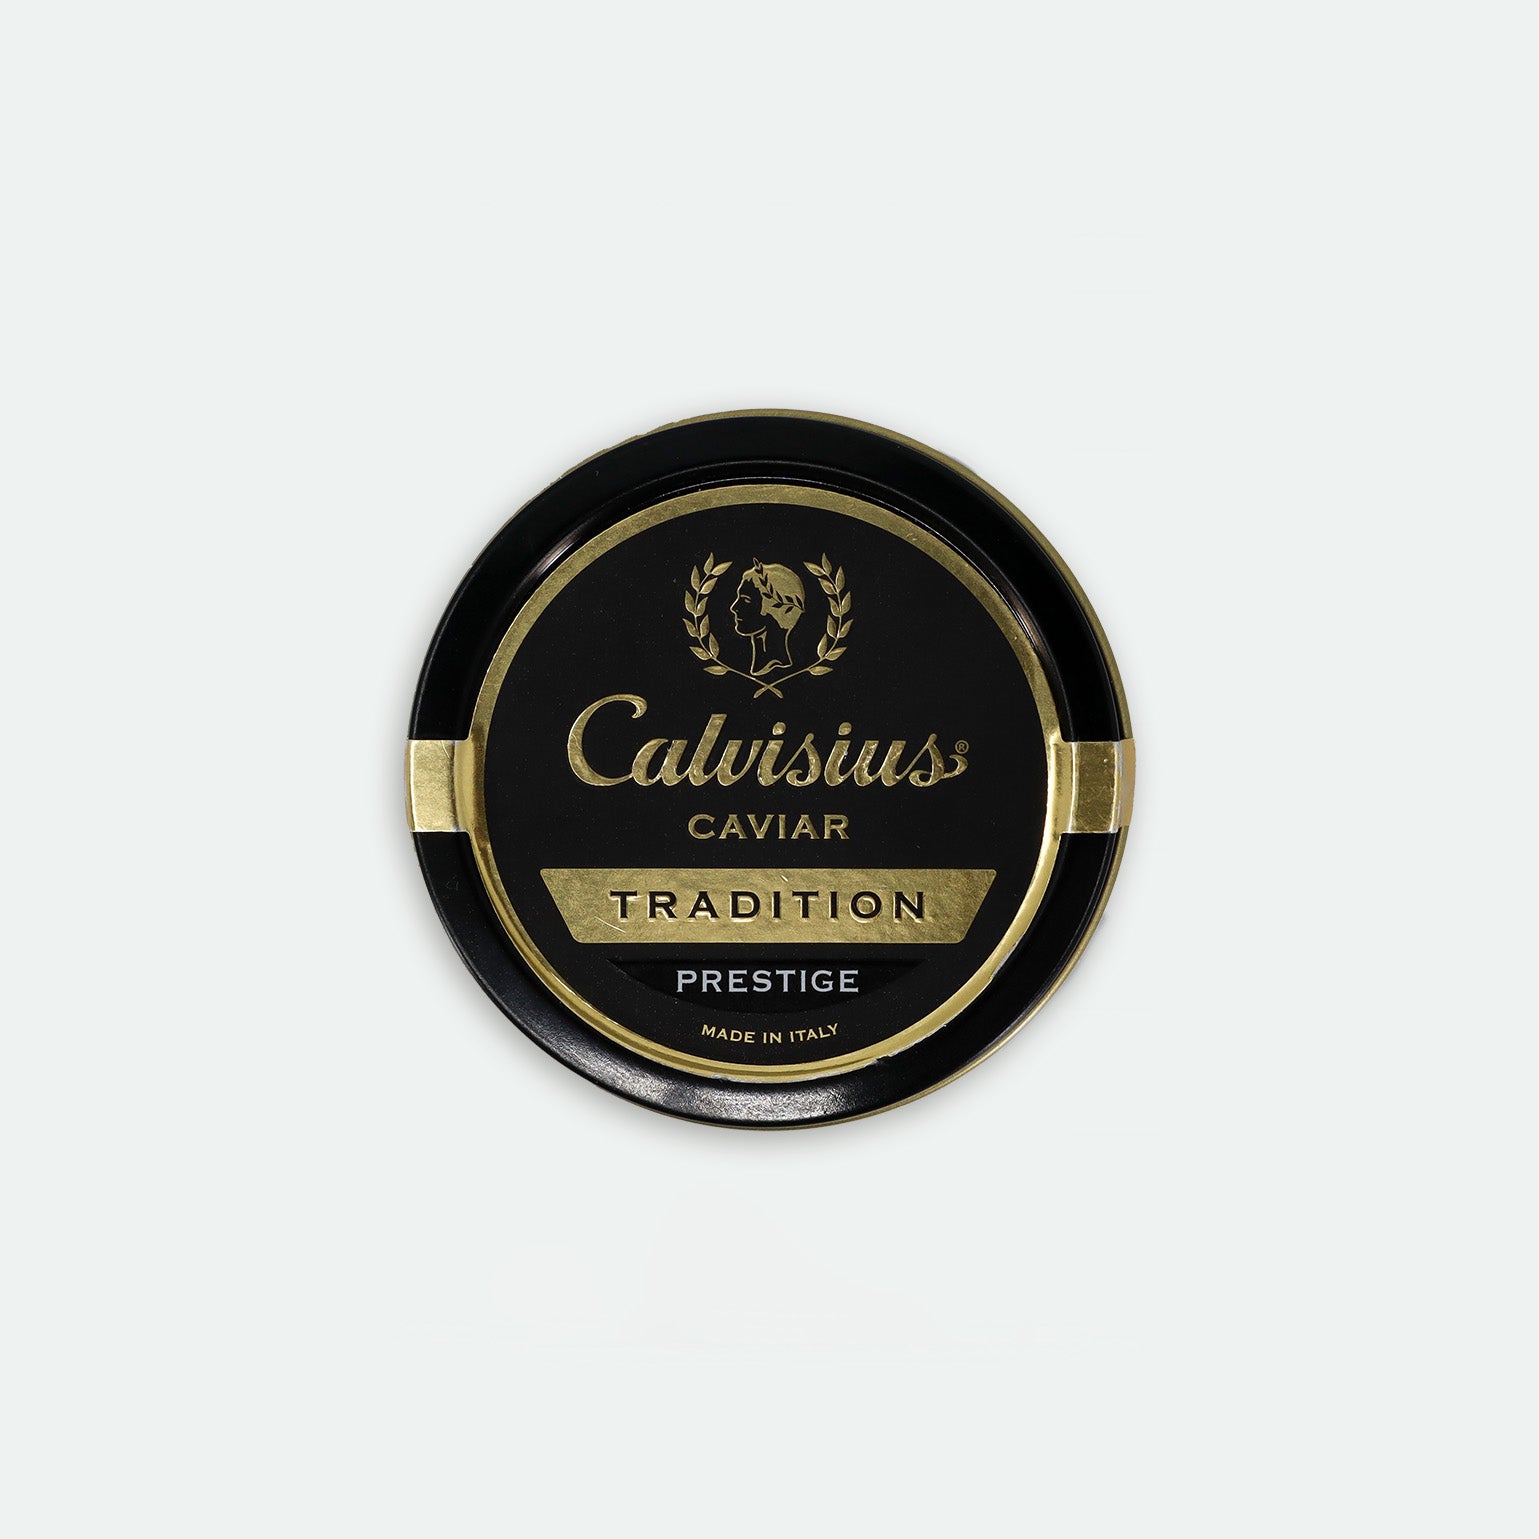 White Sterling Caviar 30g – Seafood and More